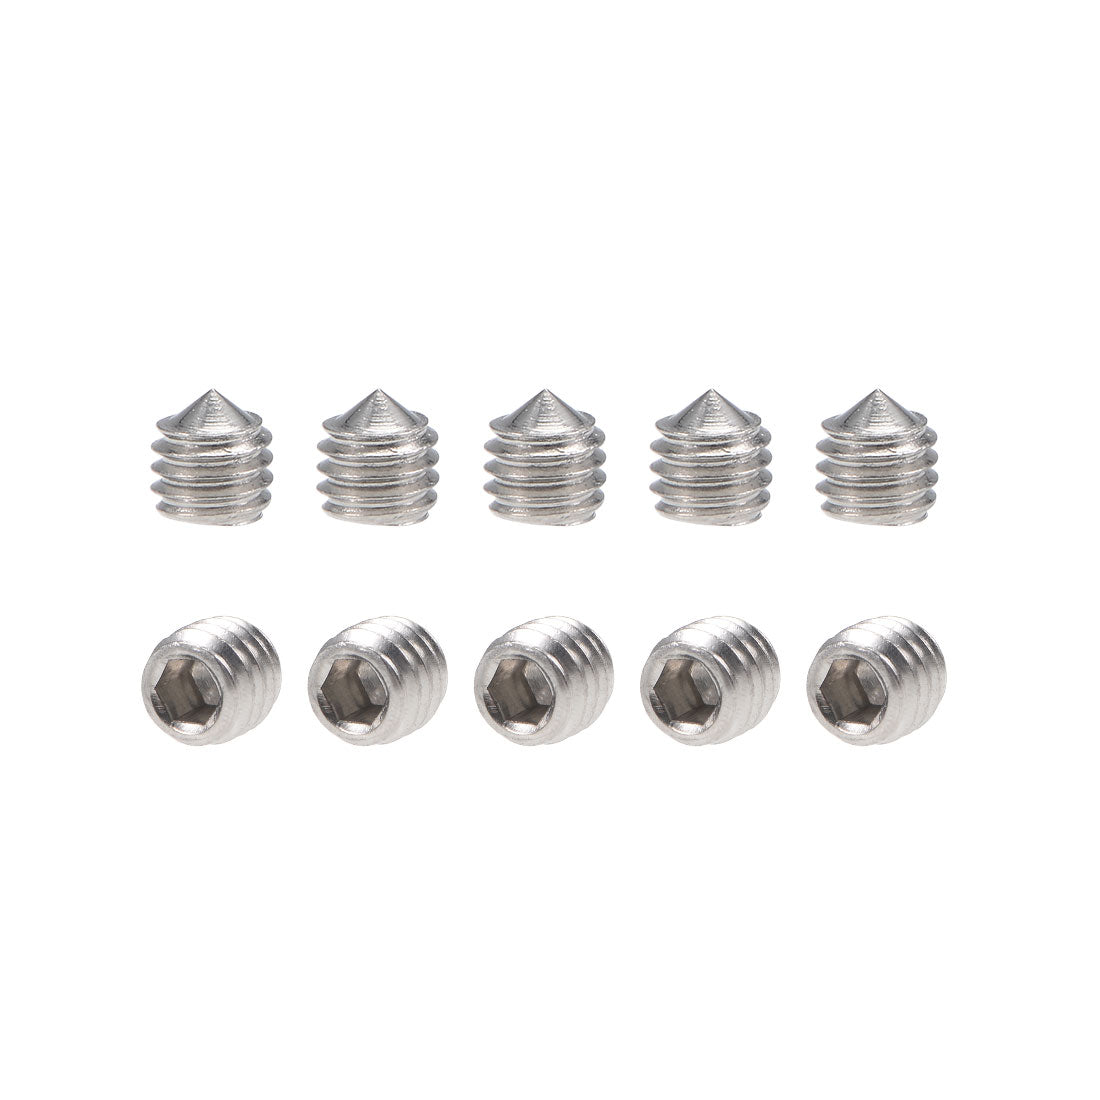 uxcell Uxcell 50Pcs M3x3mm Internal Hex Socket Set Grub Screws Cone Point 304 Stainless Steel Screw